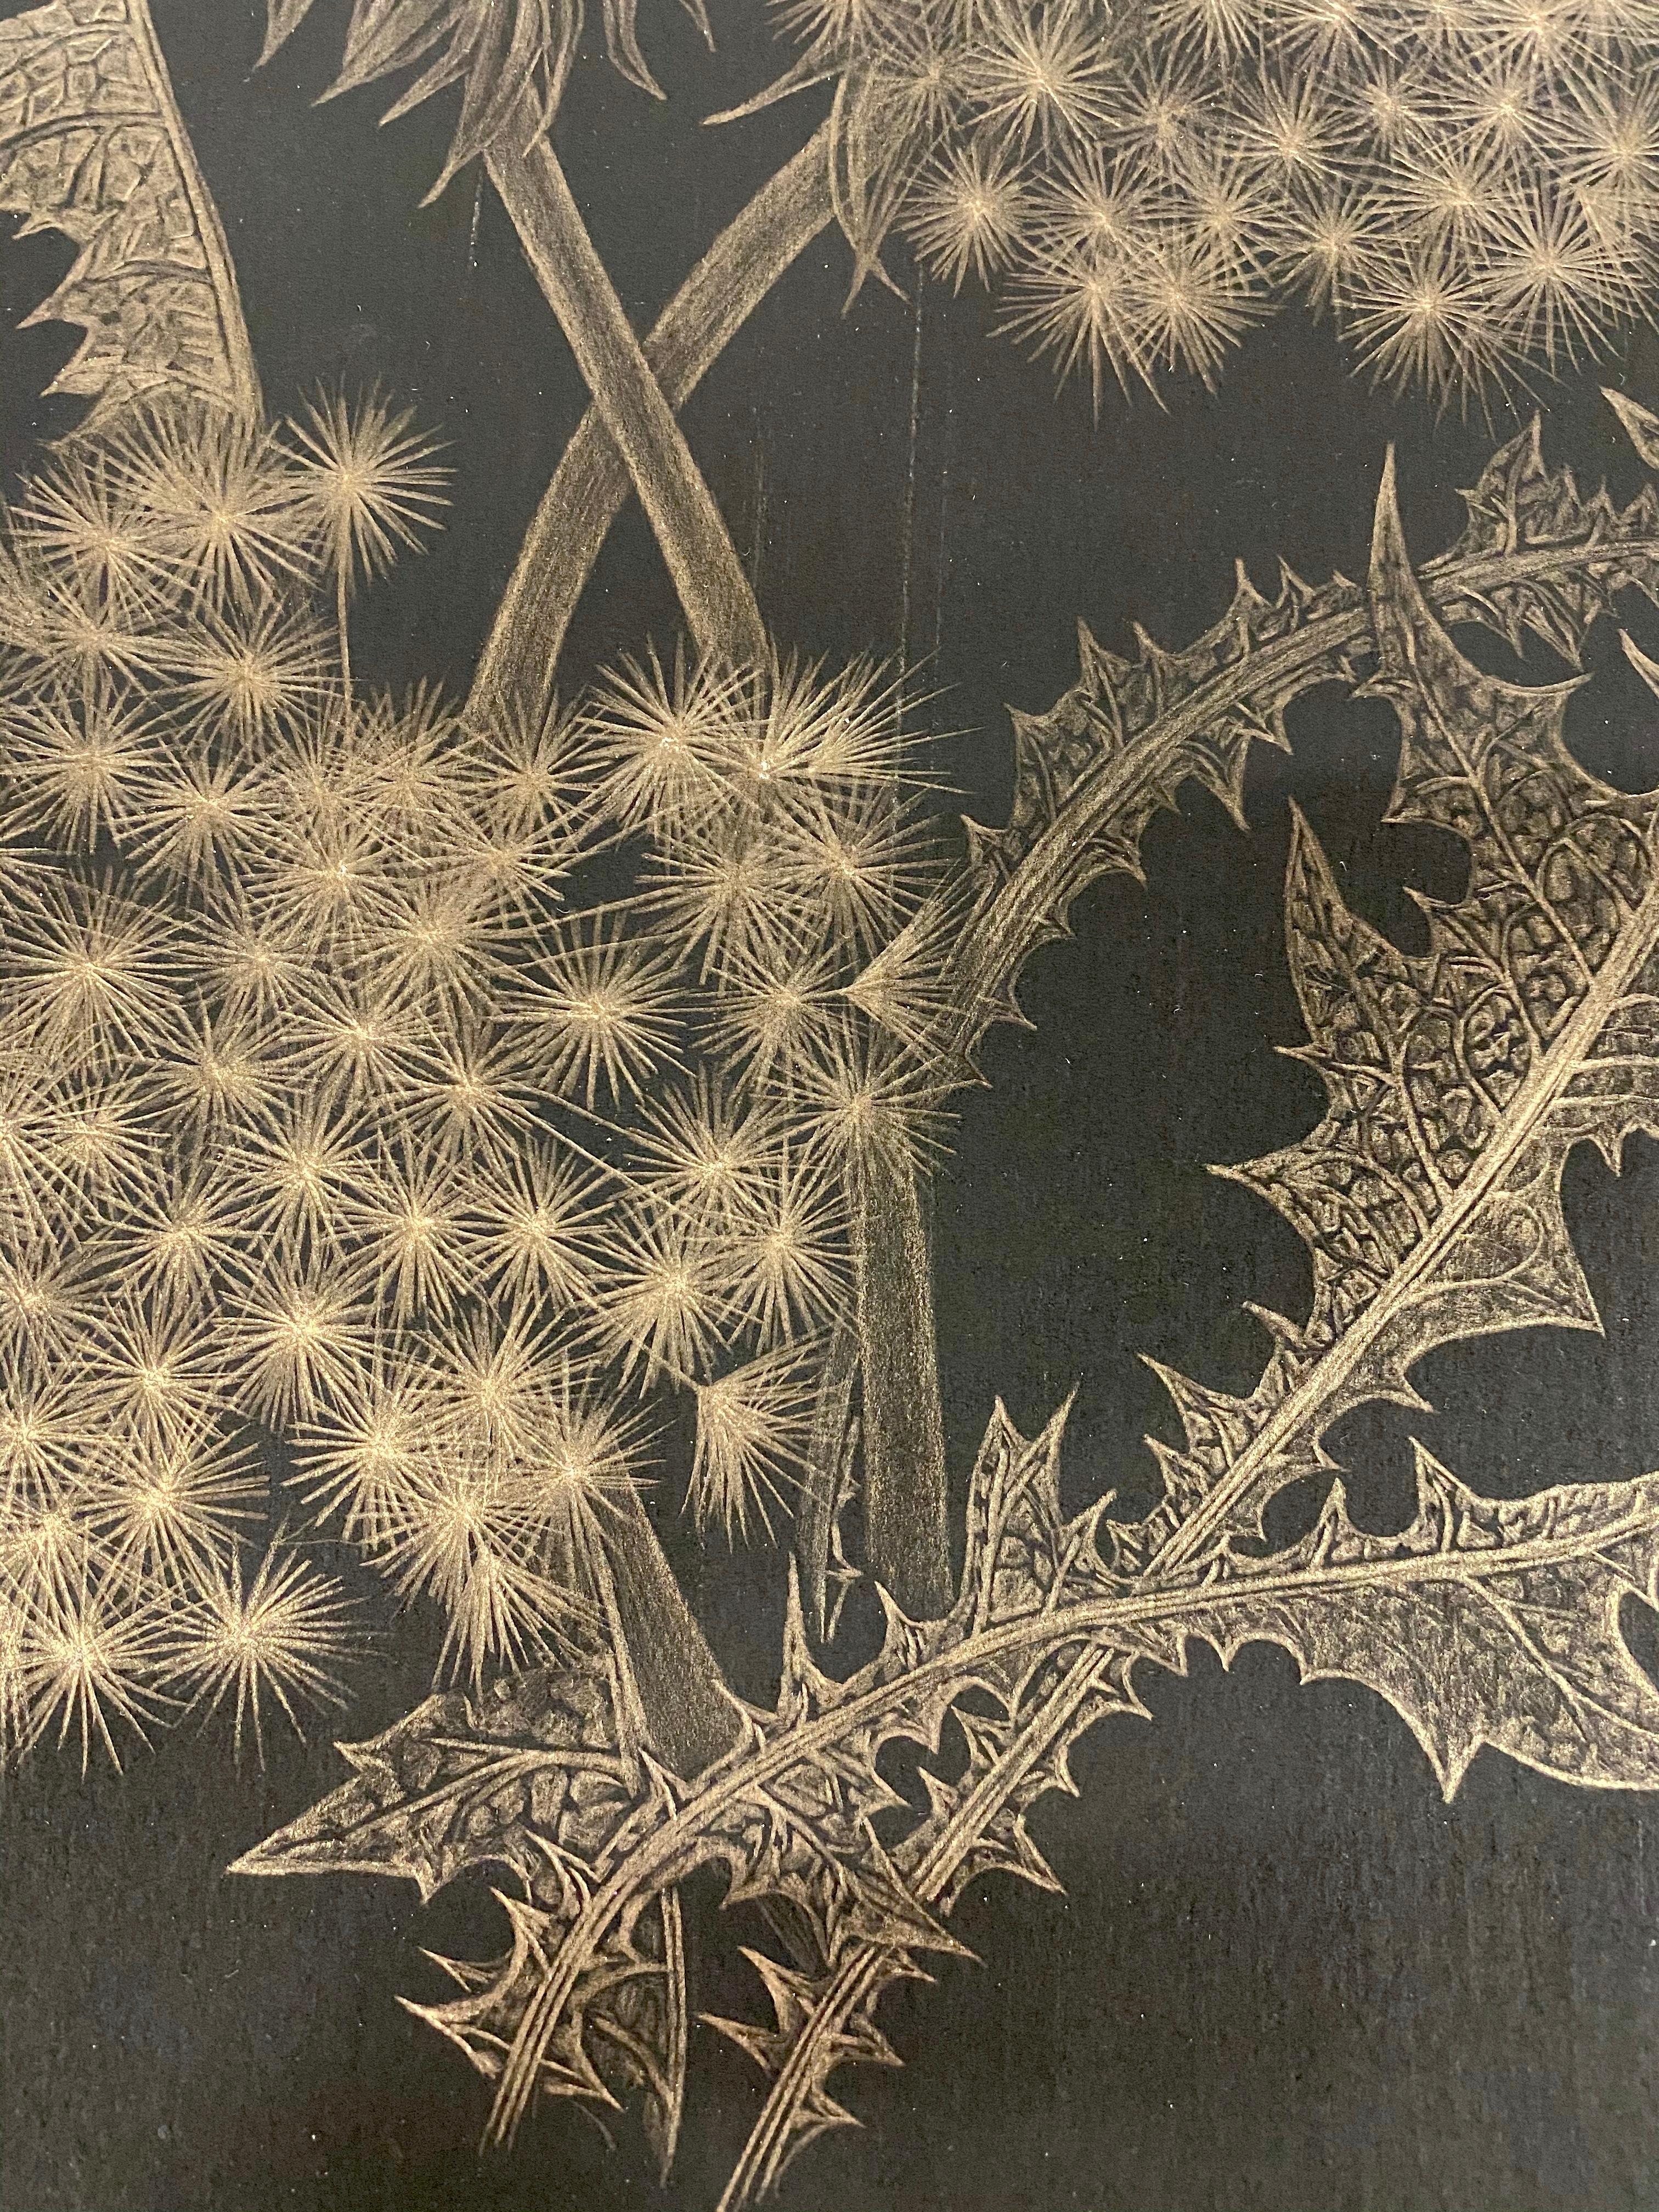 Dandelions with Bud, Small Botanical Drawing on Black Paper made with 14K Gold 2